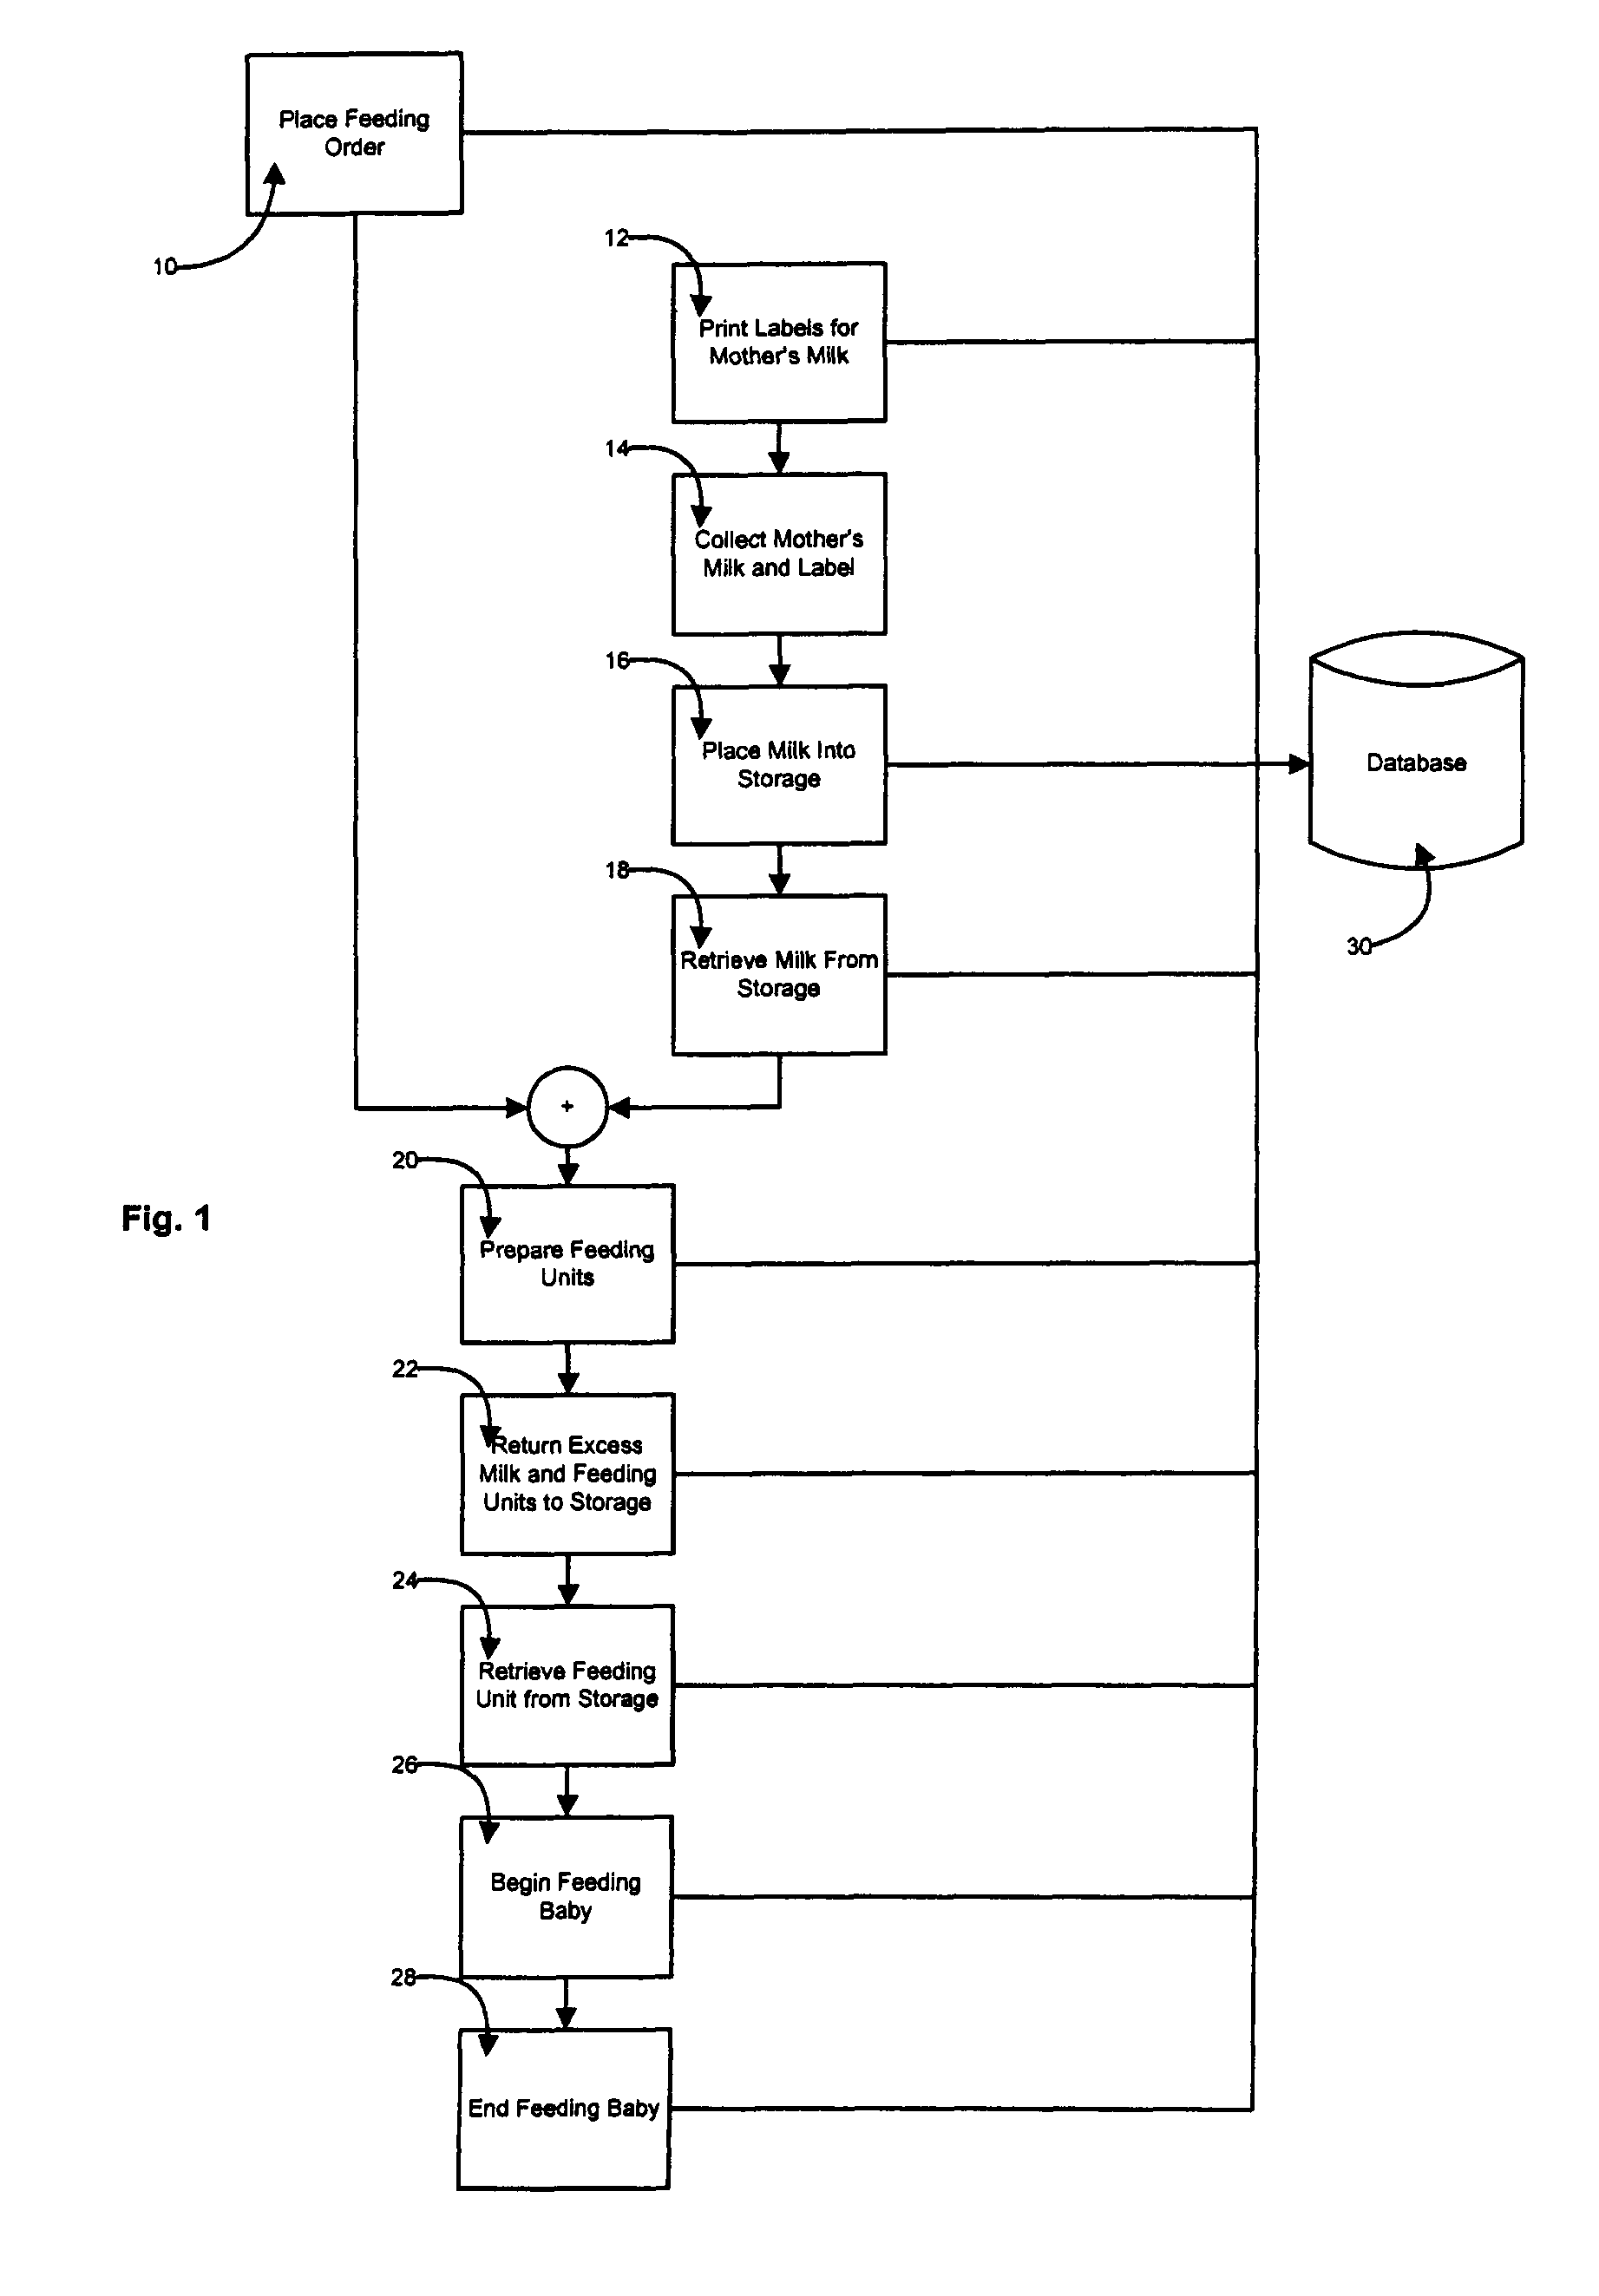 Apparatus and method for administration of mother's milk